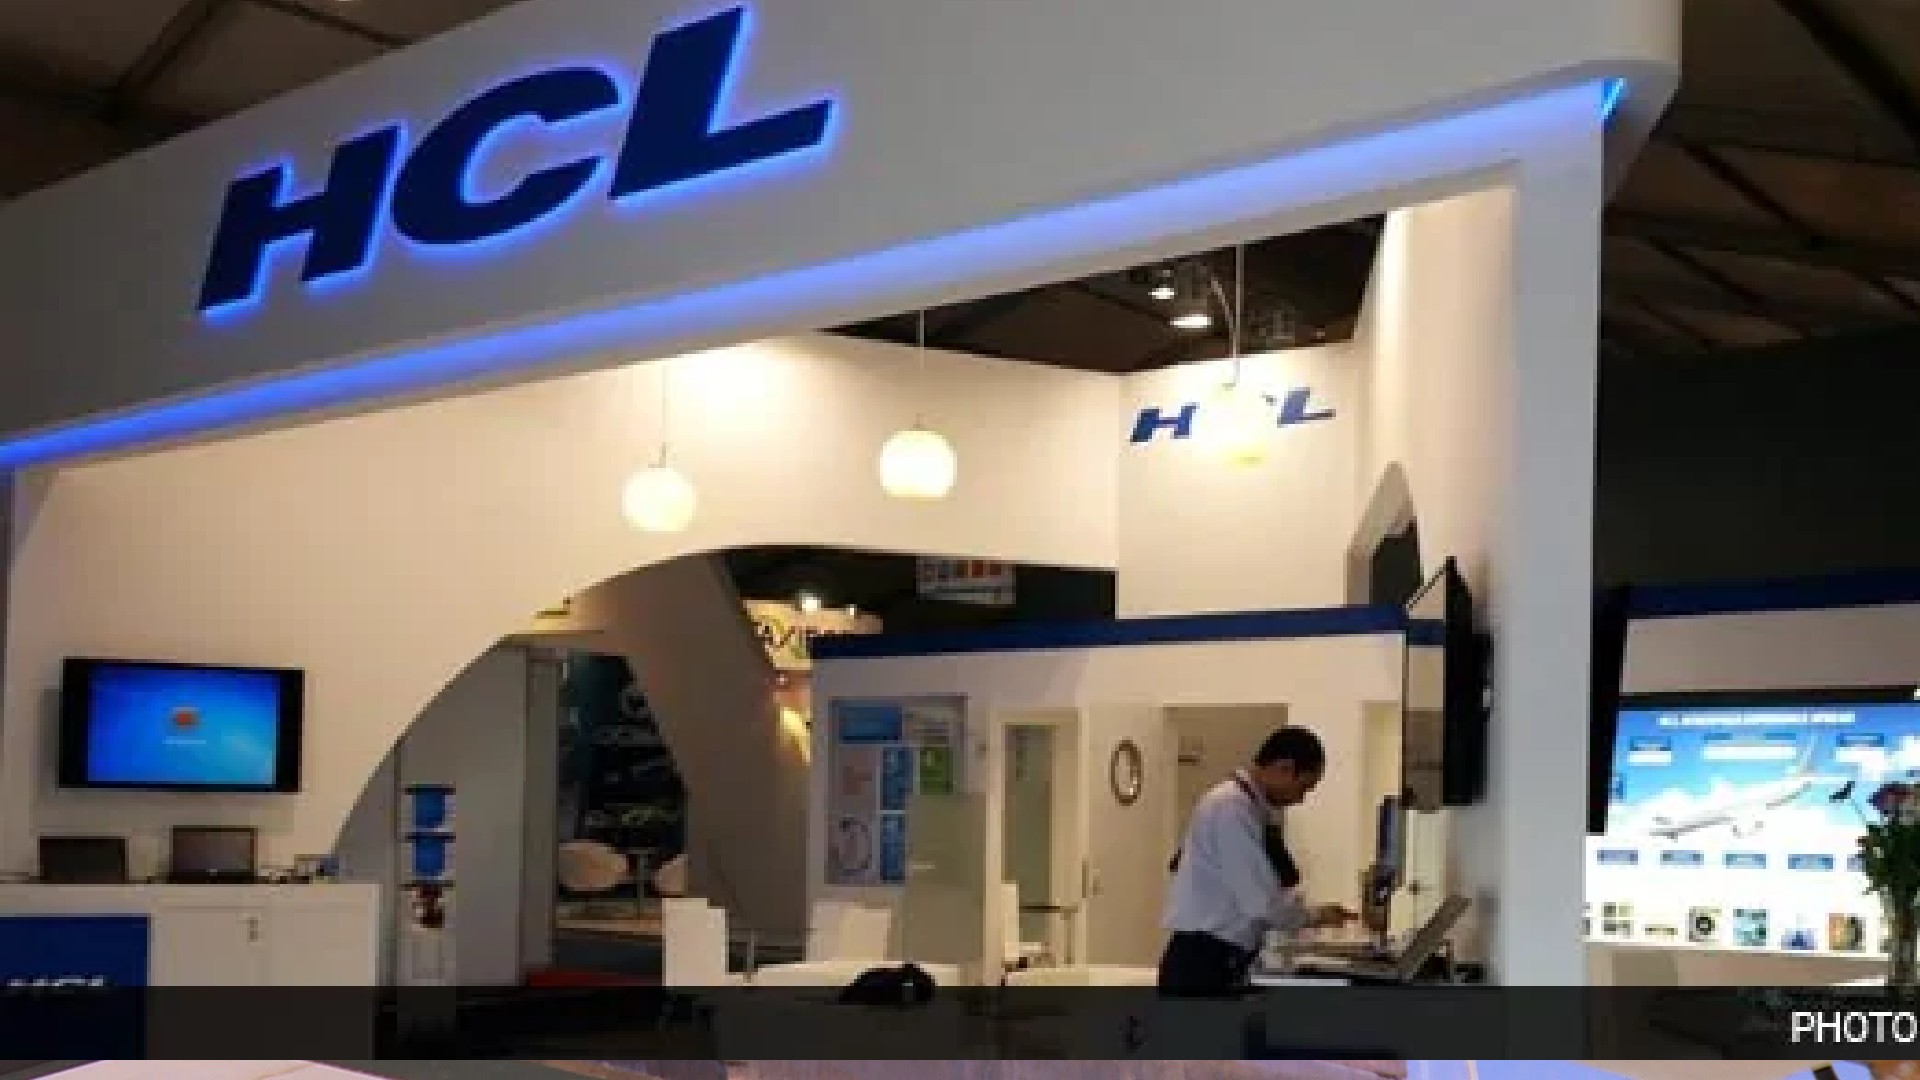 70% Of New Employees In HCL Will Be Freshers; Only 30% Will Be Experienced Employees